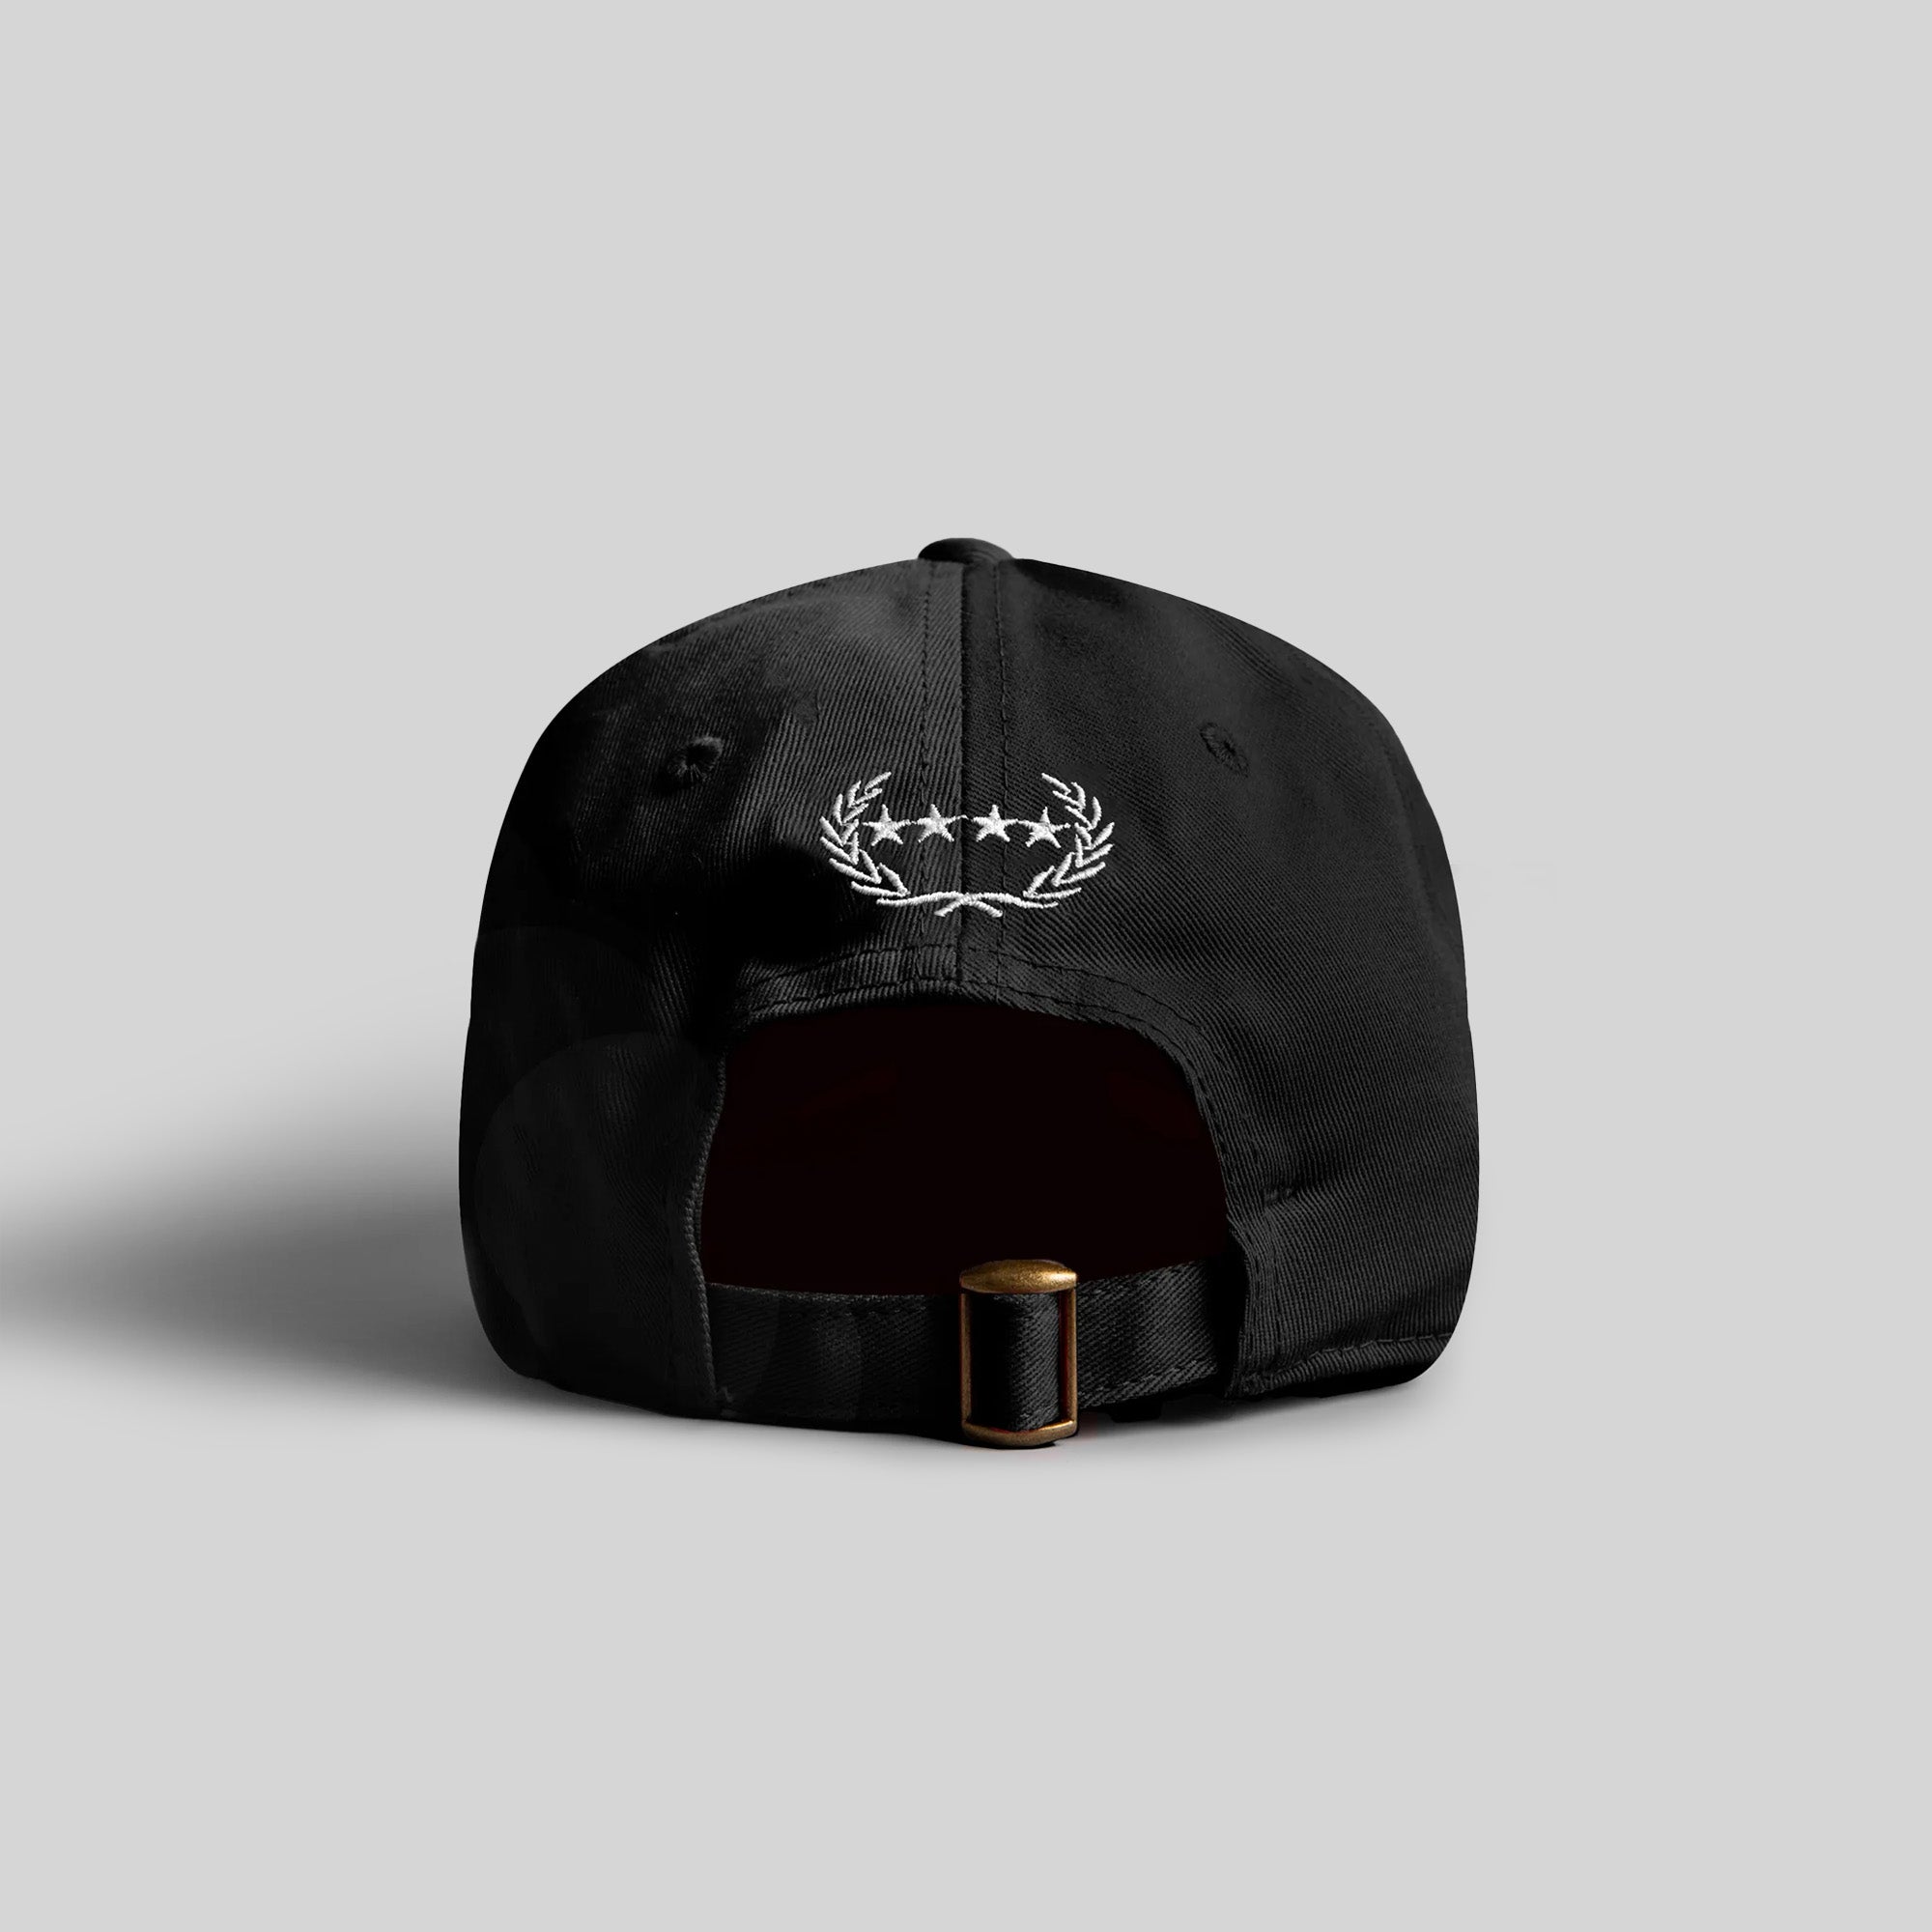 NO F*CKS GIVEN BLACK RELAXED FIT HAT